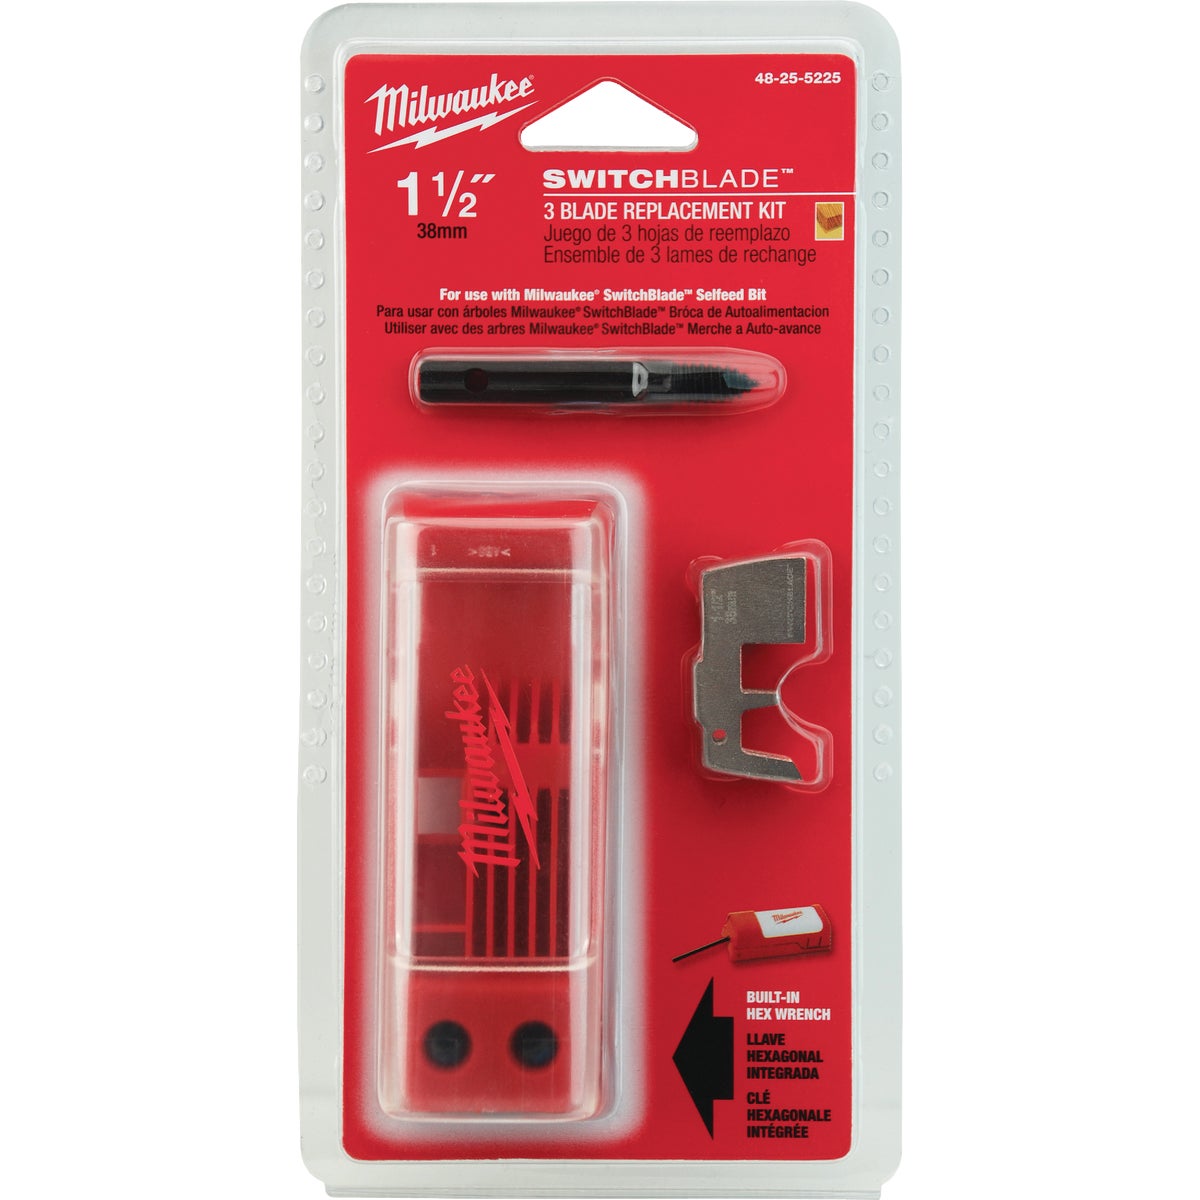 Milwaukee 1-1/2 In. Replacement Blade